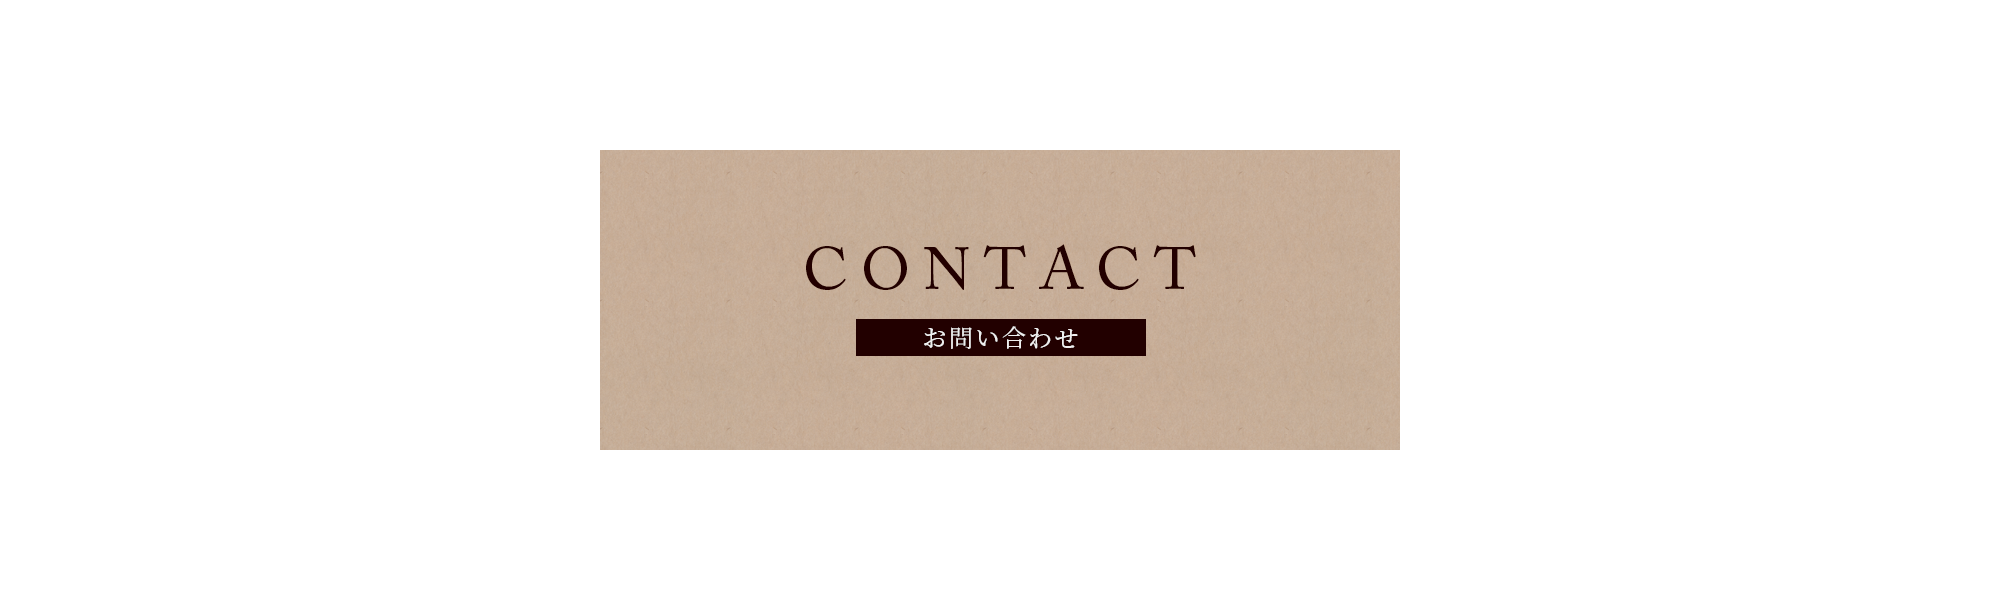 banner_contact_on